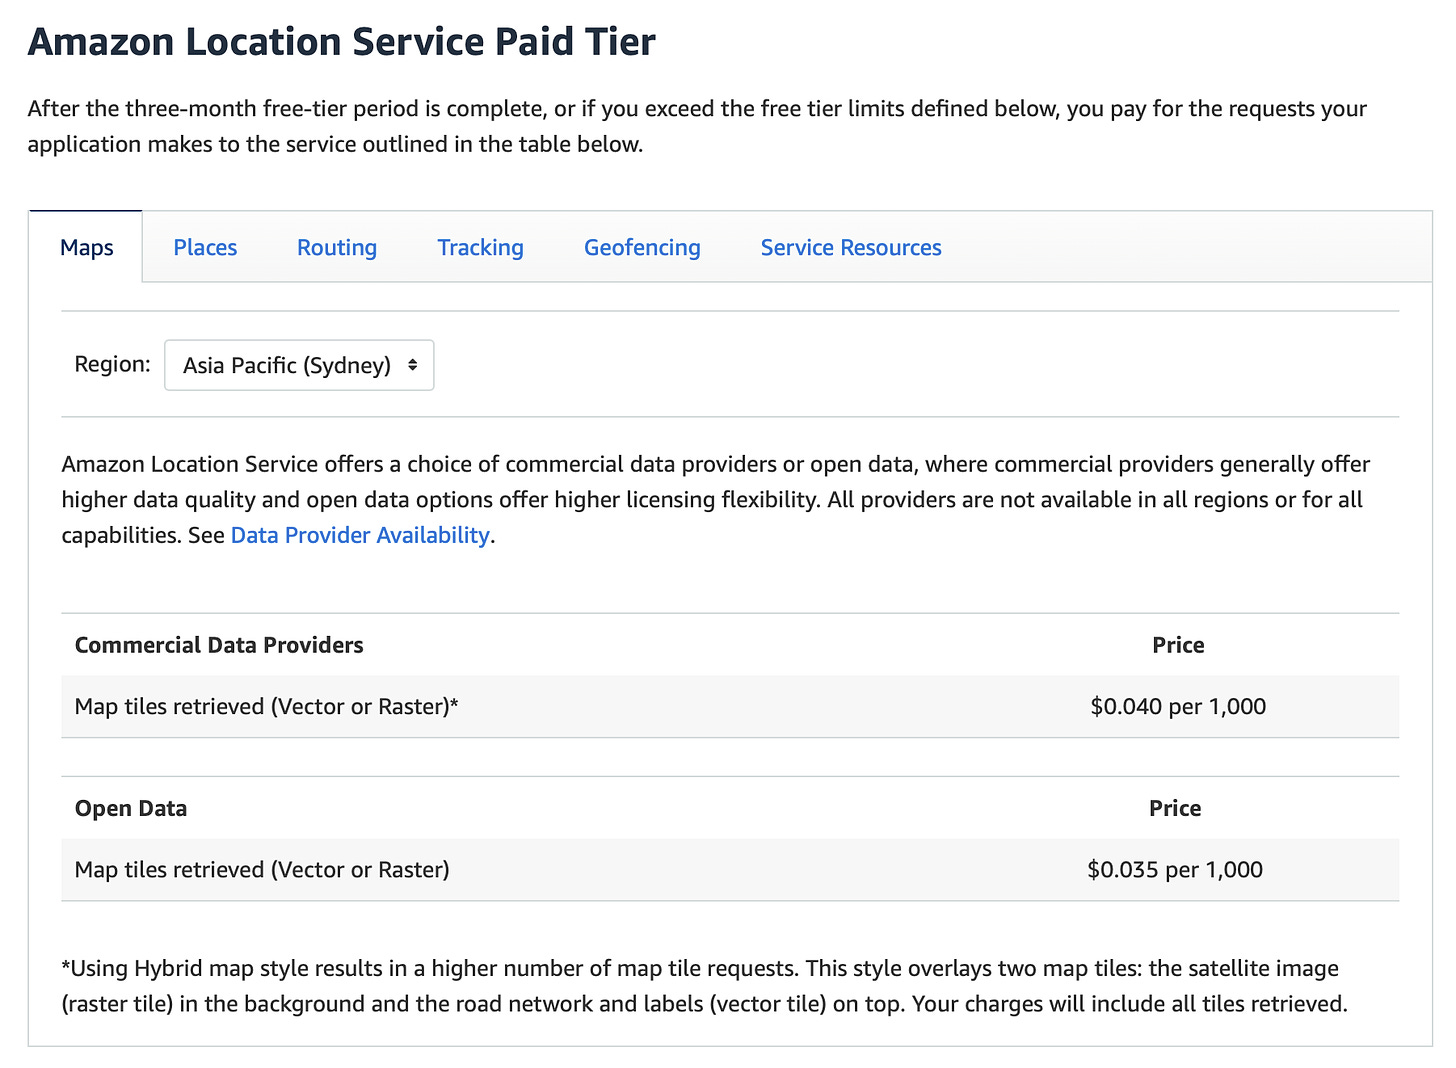 Amazon Location Service Paid Tier  After the three-month free-tier period is complete, or if you exceed the free tier limits defined below, you pay for the requests your application makes to the service outlined in the table below. Region:  Amazon Location Service offers a choice of commercial data providers or open data, where commercial providers generally offer higher data quality and open data options offer higher licensing flexibility. All providers are not available in all regions or for all capabilities. See Data Provider Availability.  Commercial Data Providers	Price Map tiles retrieved (Vector or Raster)*	$0.040 per 1,000 Open Data	Price Map tiles retrieved (Vector or Raster)	$0.035 per 1,000 *Using Hybrid map style results in a higher number of map tile requests. This style overlays two map tiles: the satellite image (raster tile) in the background and the road network and labels (vector tile) on top. Your charges will include all tiles retrieved.